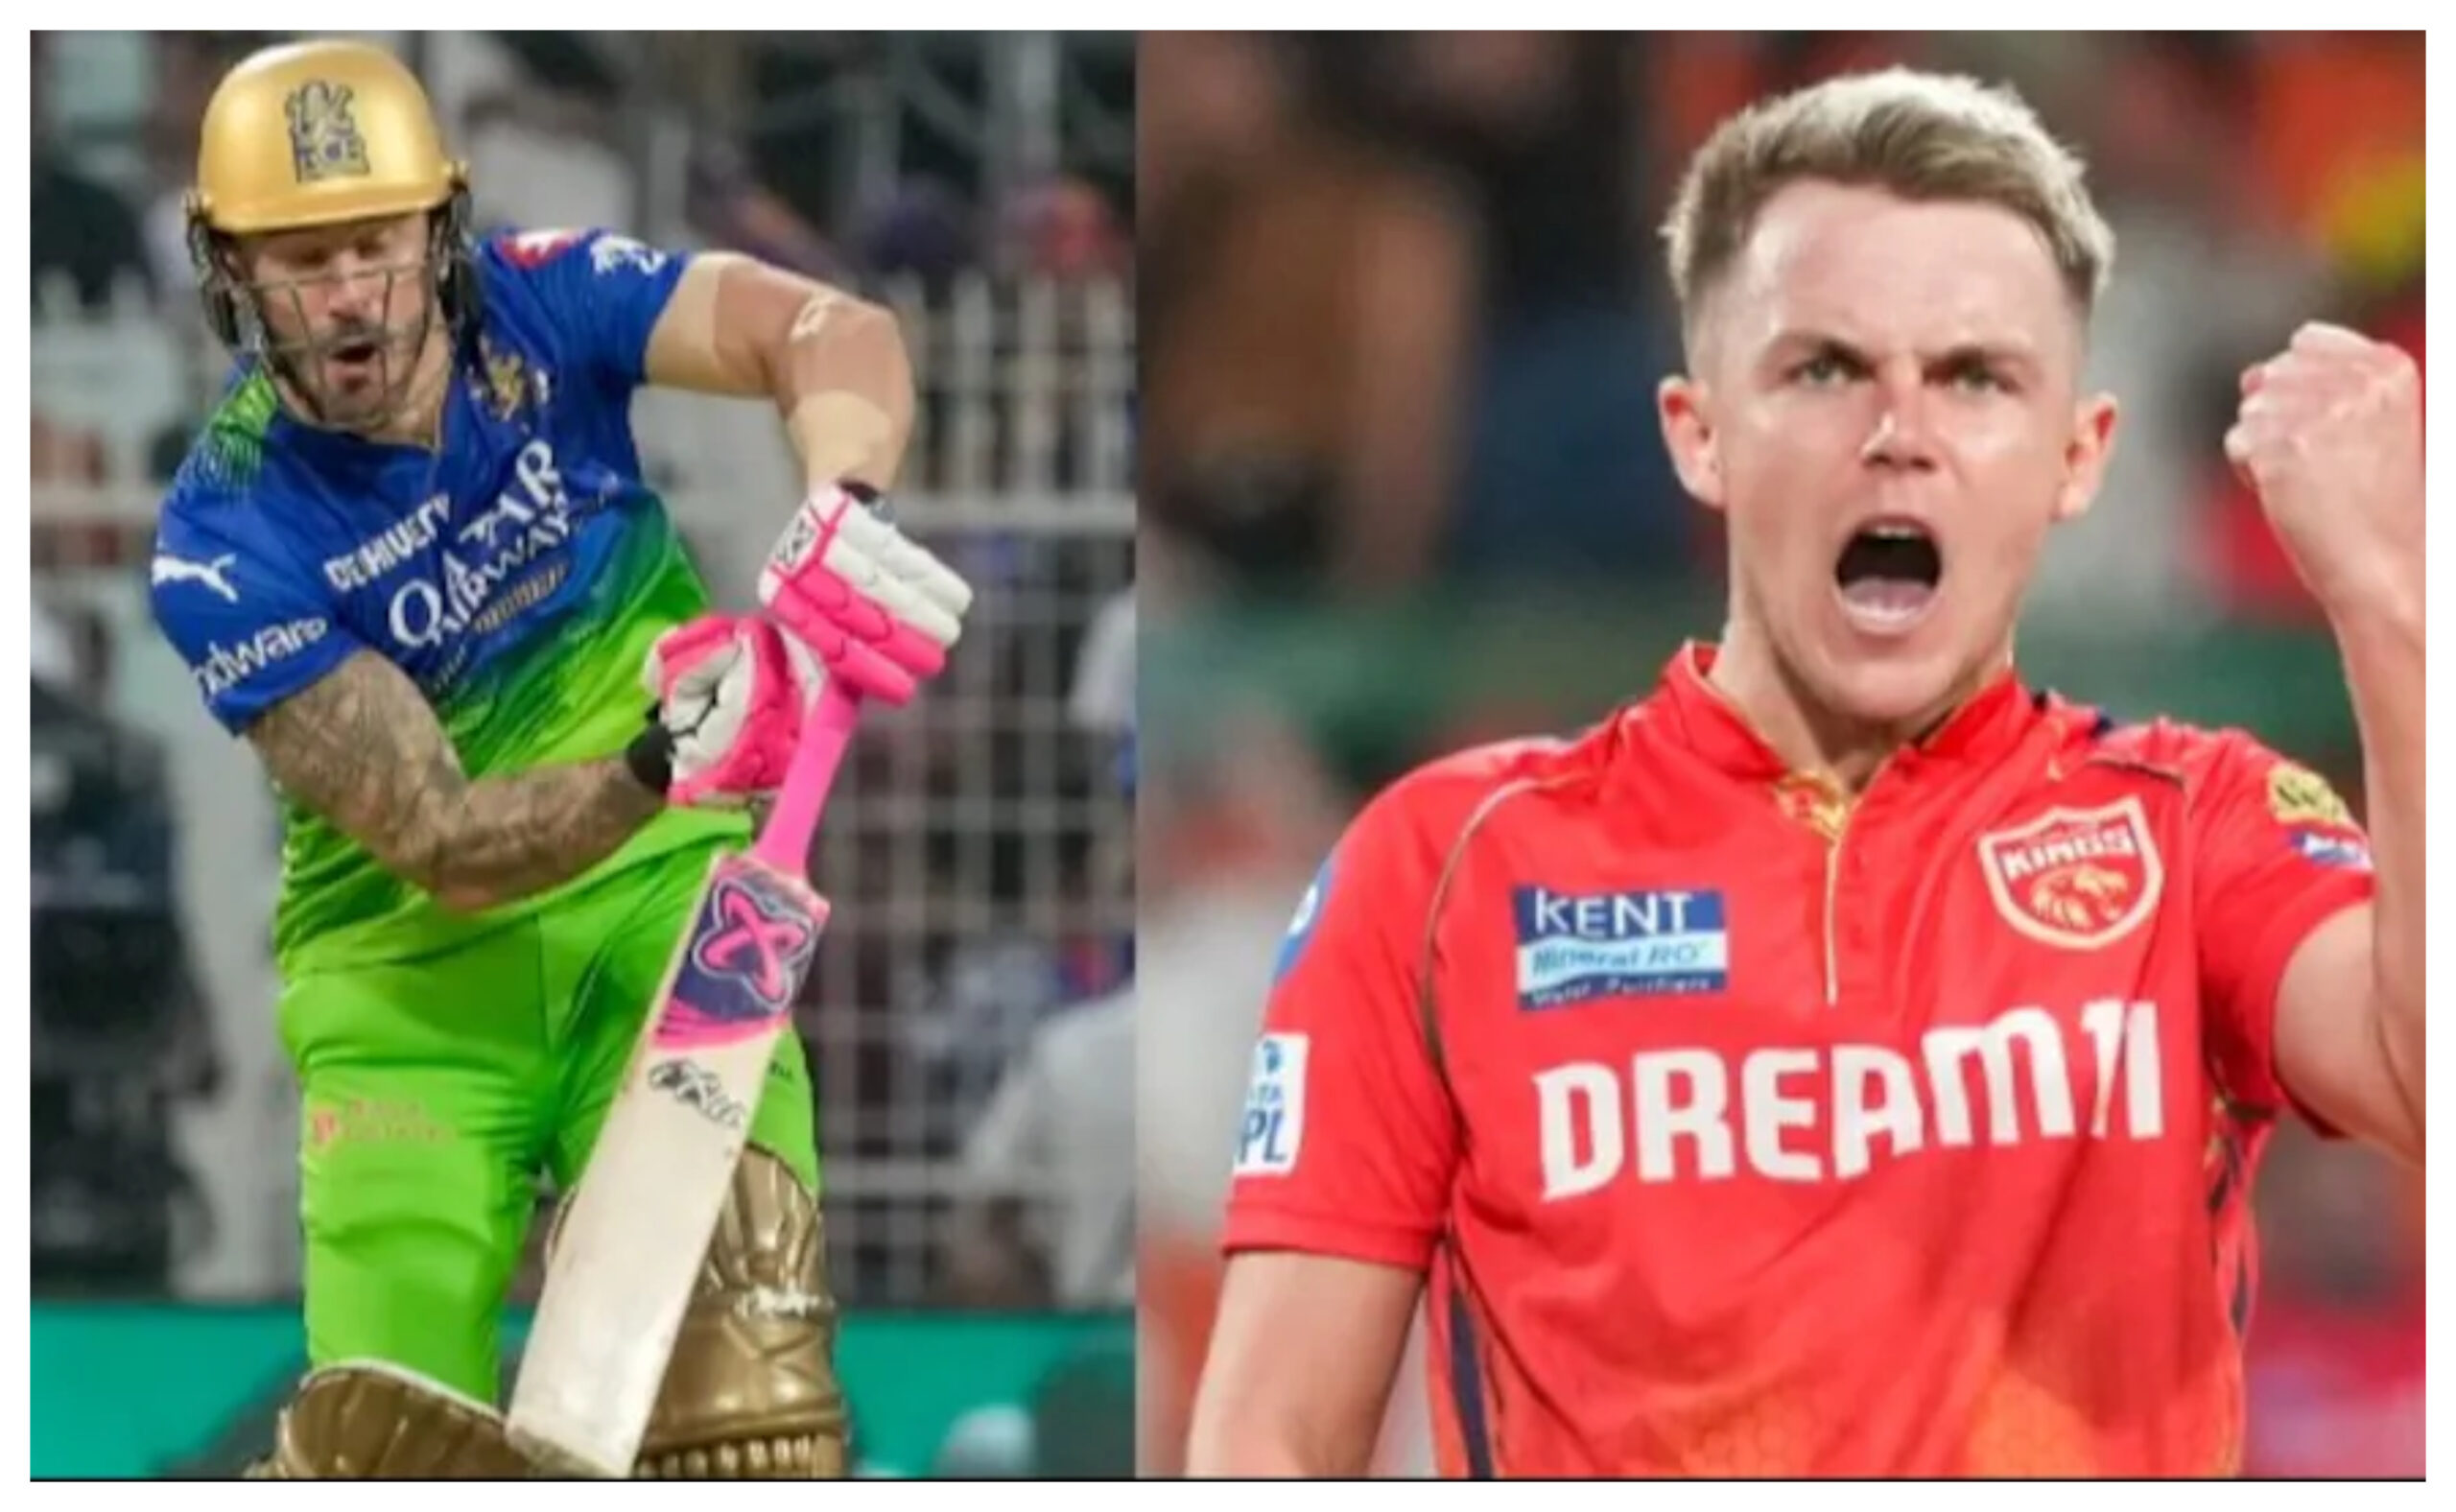 IPL: Fine on RCB's Faf Duplessis and Punjab Kings' Sam Curran in hindi news, faf-du-plessis-sam-curran-fined-for-ipl-code-of-conduct-breaches